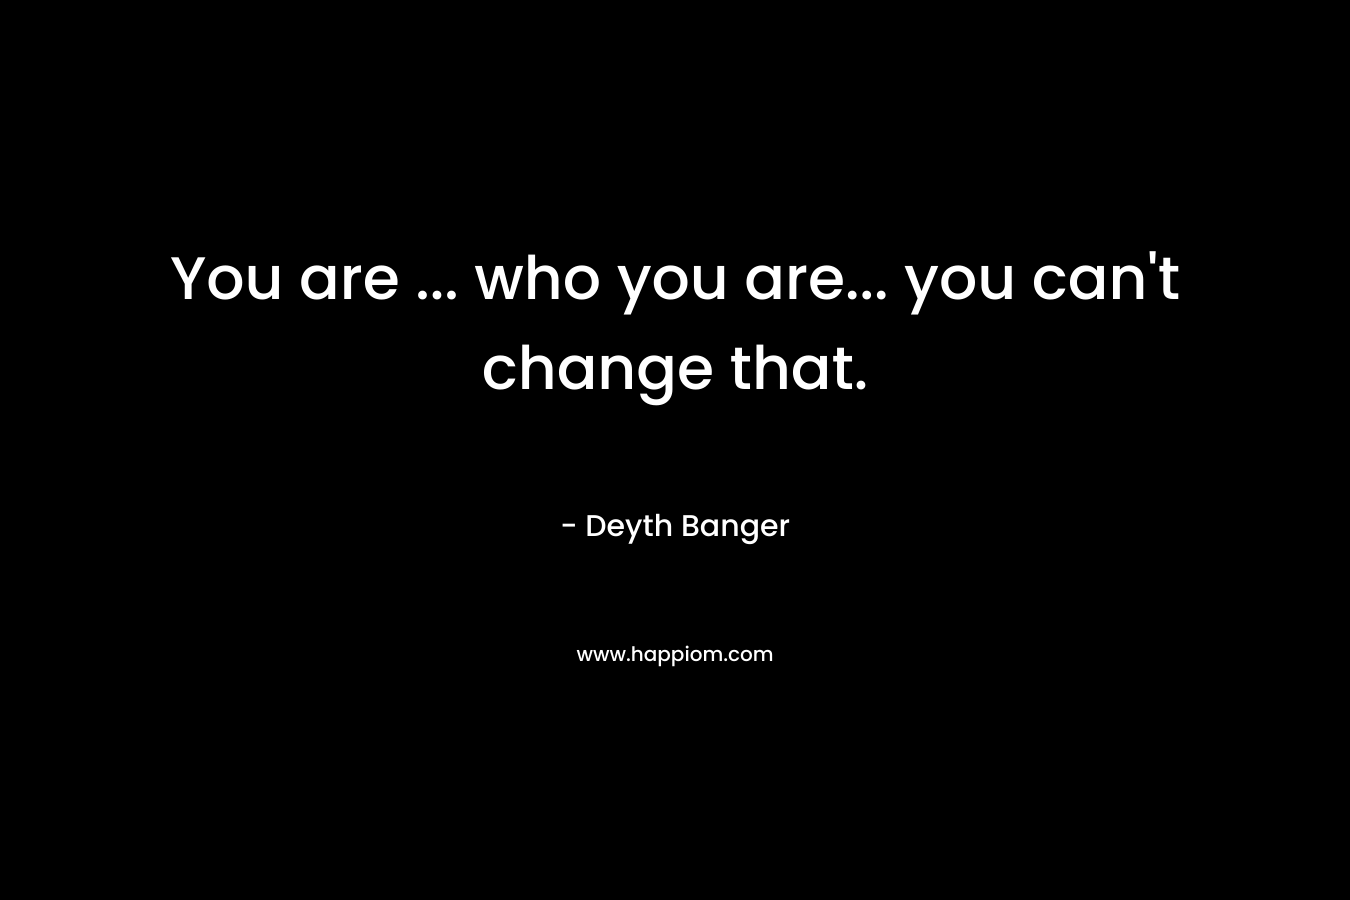 You are ... who you are... you can't change that.